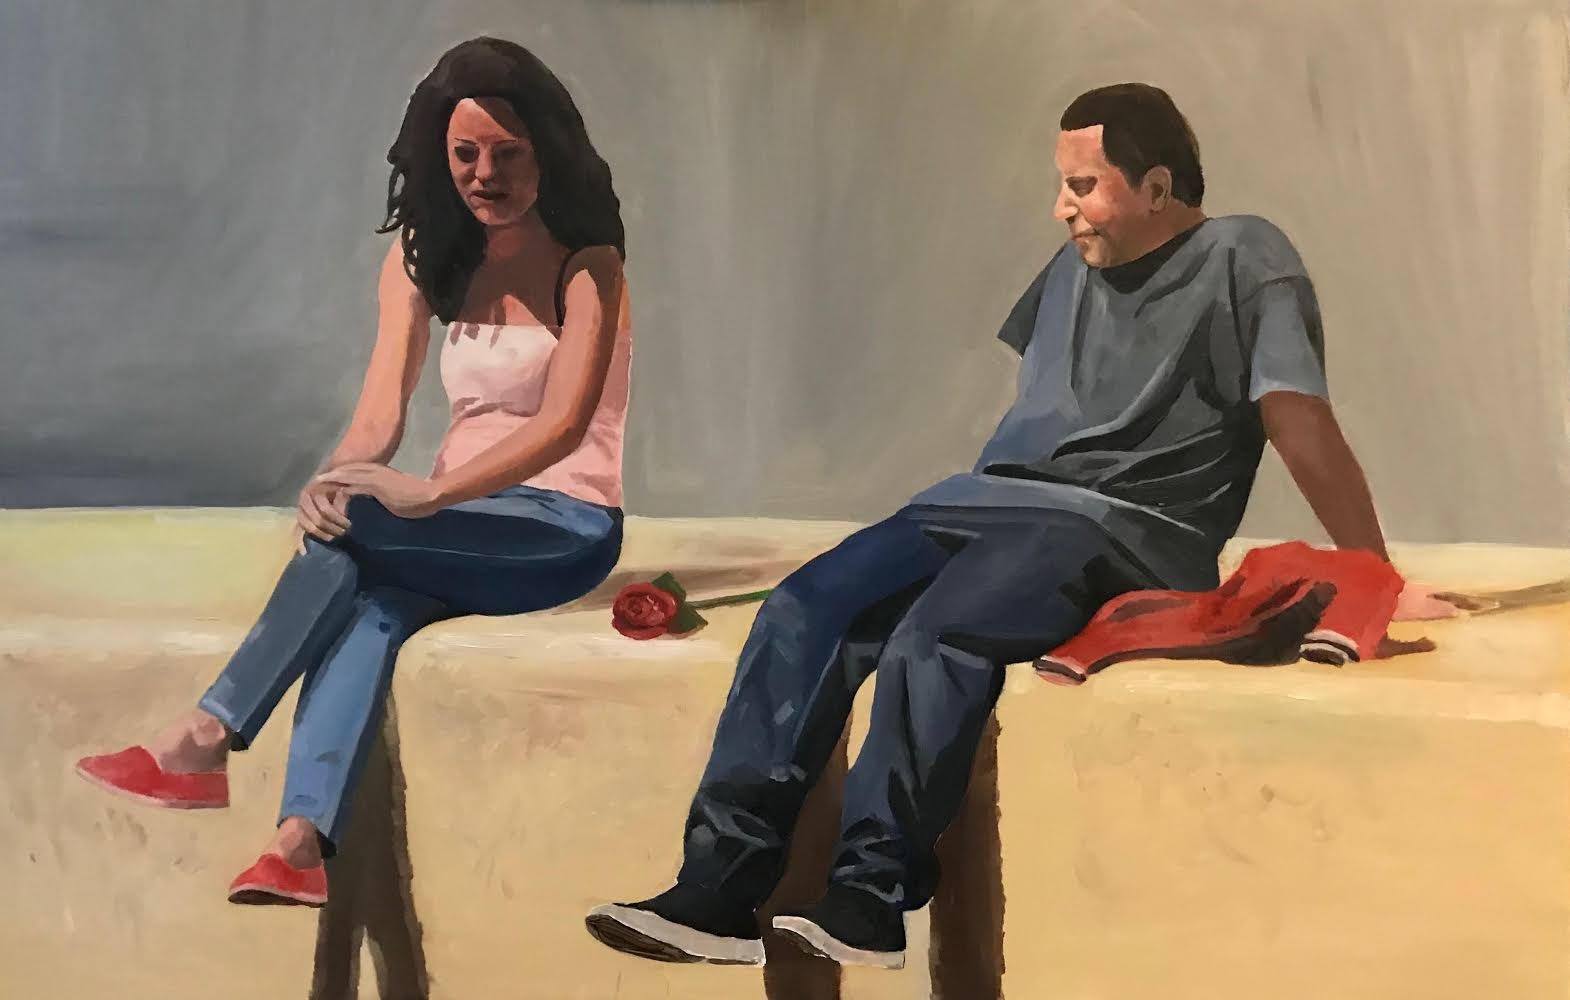 A painting of two people sitting with a rose between them